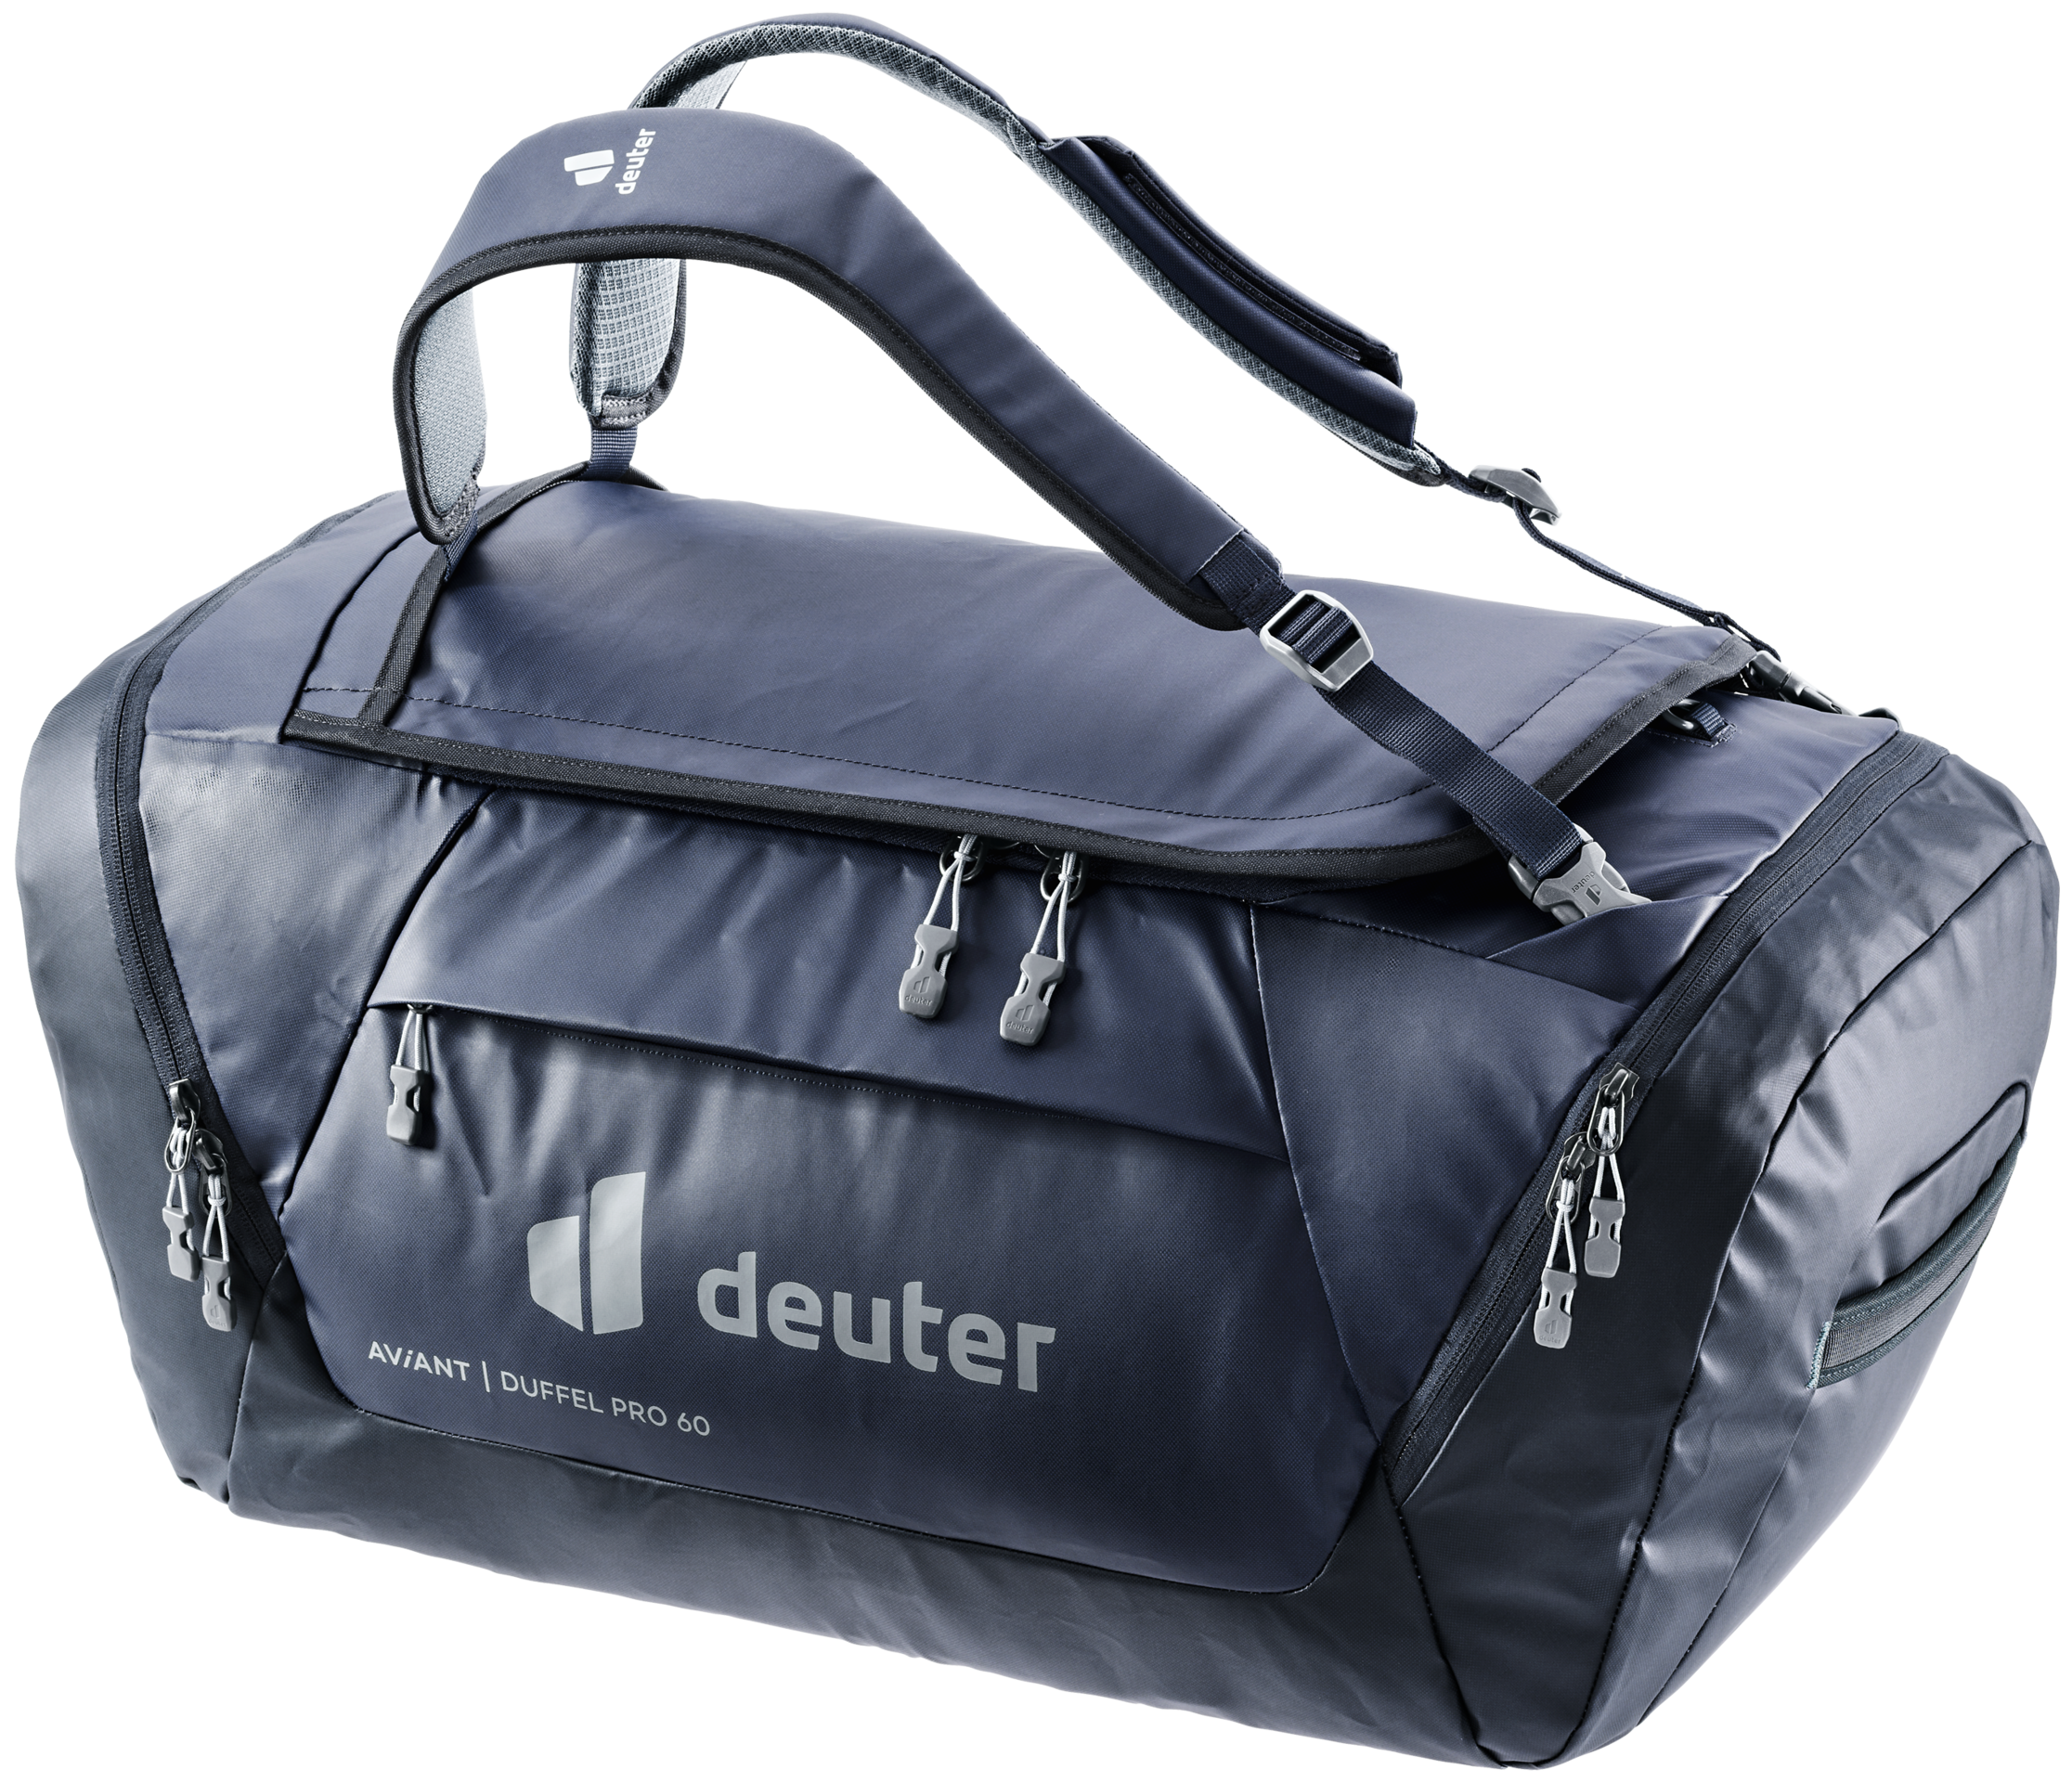 Unlock Wilderness' choice in the Deuter Vs North Face comparison, the Aviant Duffel Pro 60 by Deuter